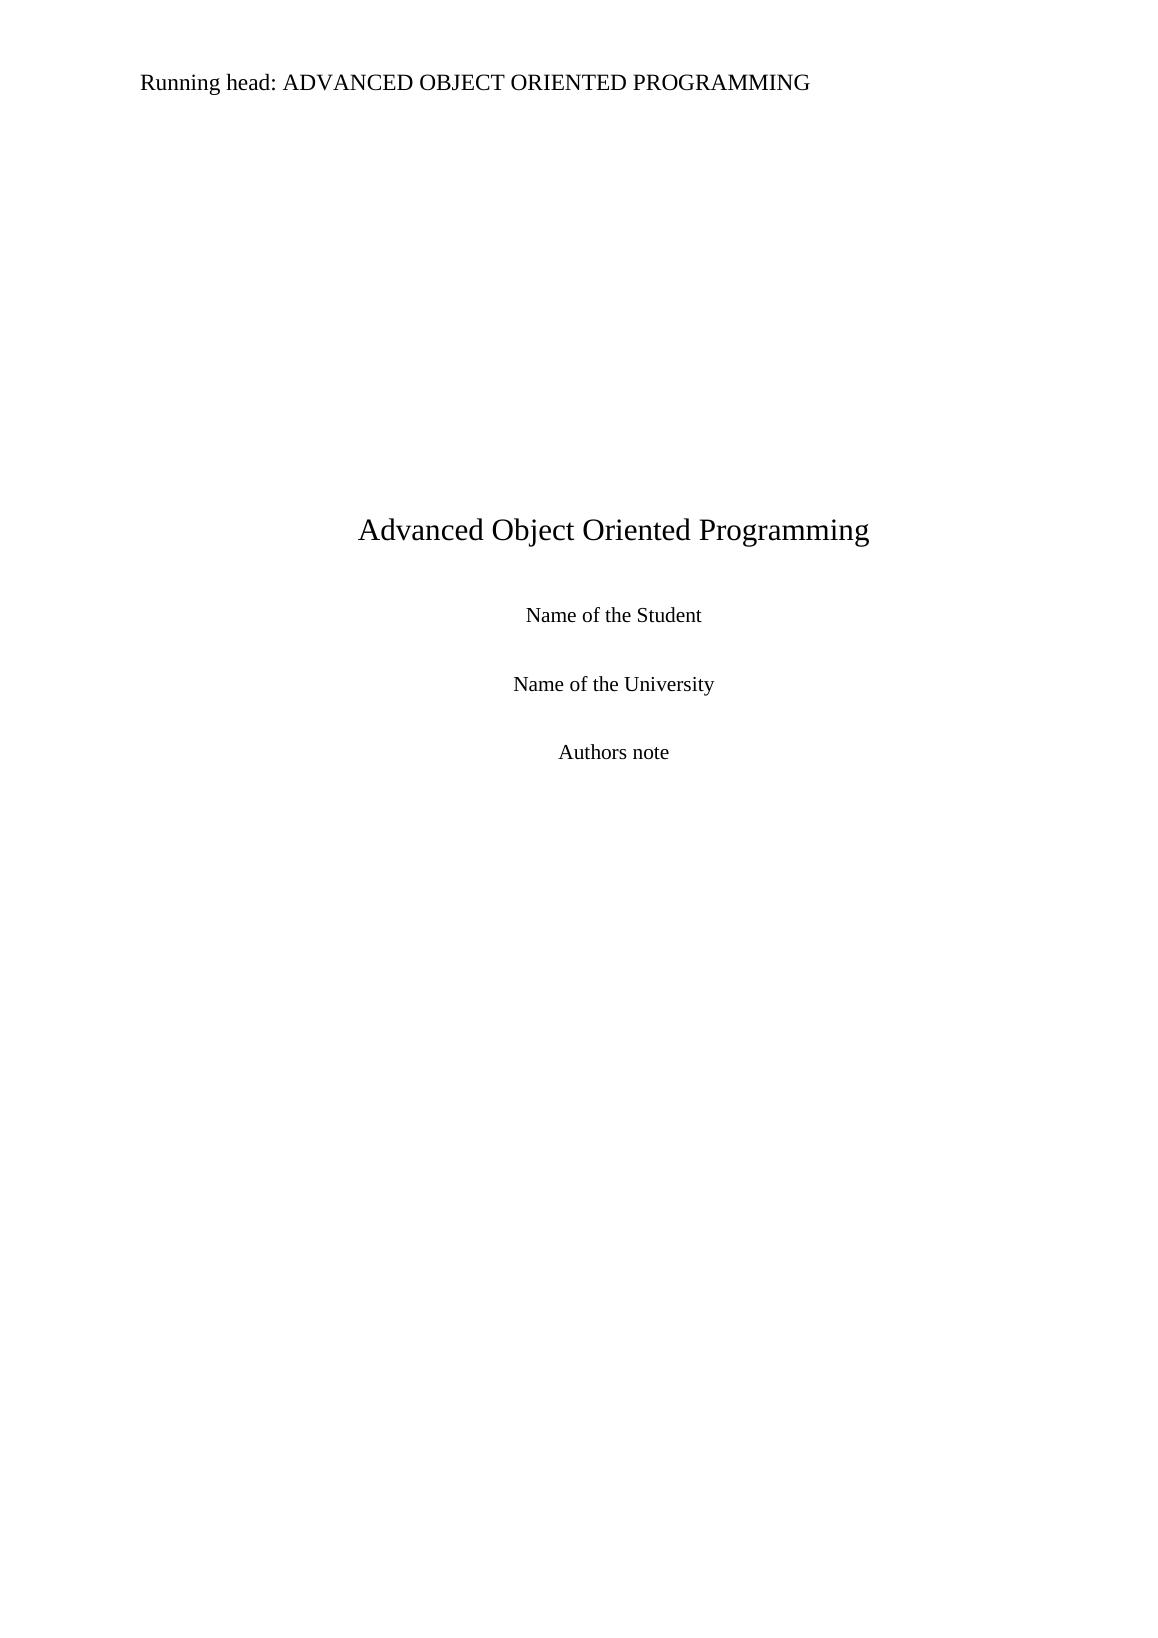 Advanced Object Oriented Programming_1